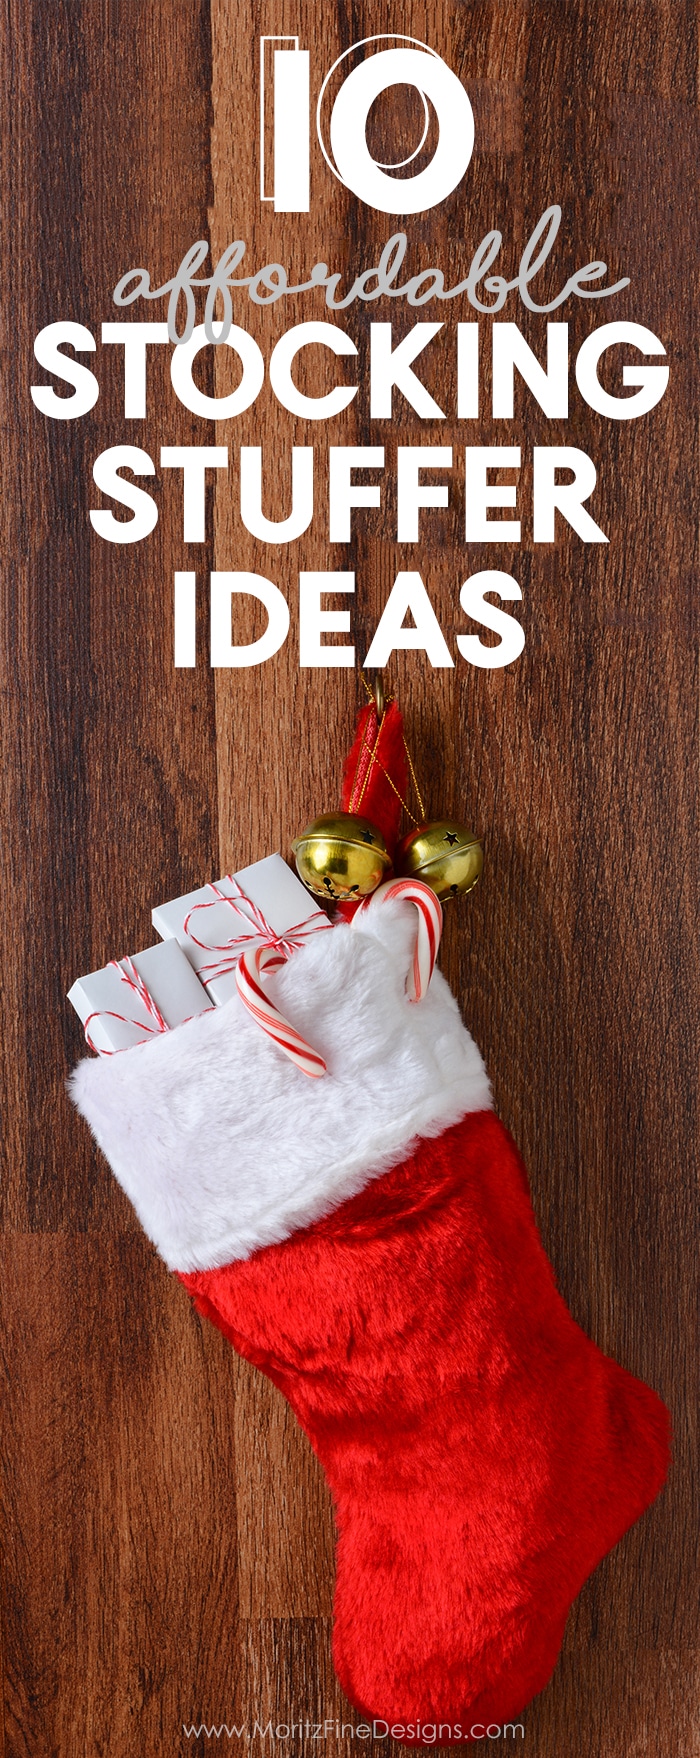 10 Affordable Stocking Stuffer ideas + Free Printable Coupon Book